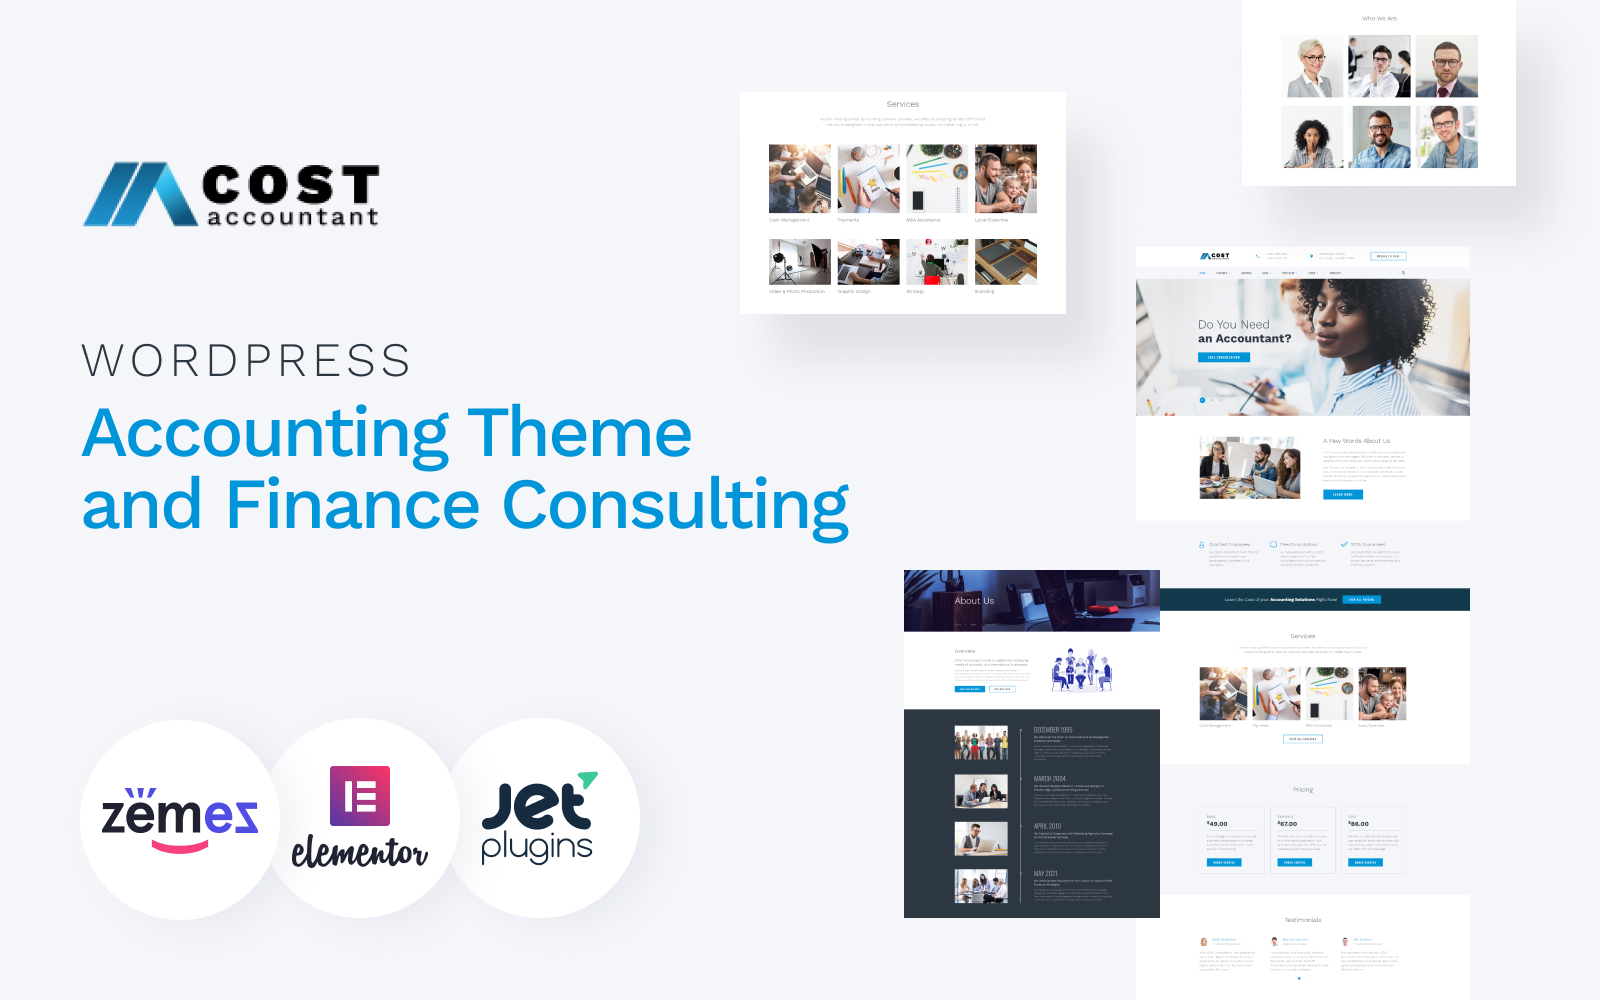 Cost Accountant - WordPress Accounting Theme and Finance Consulting